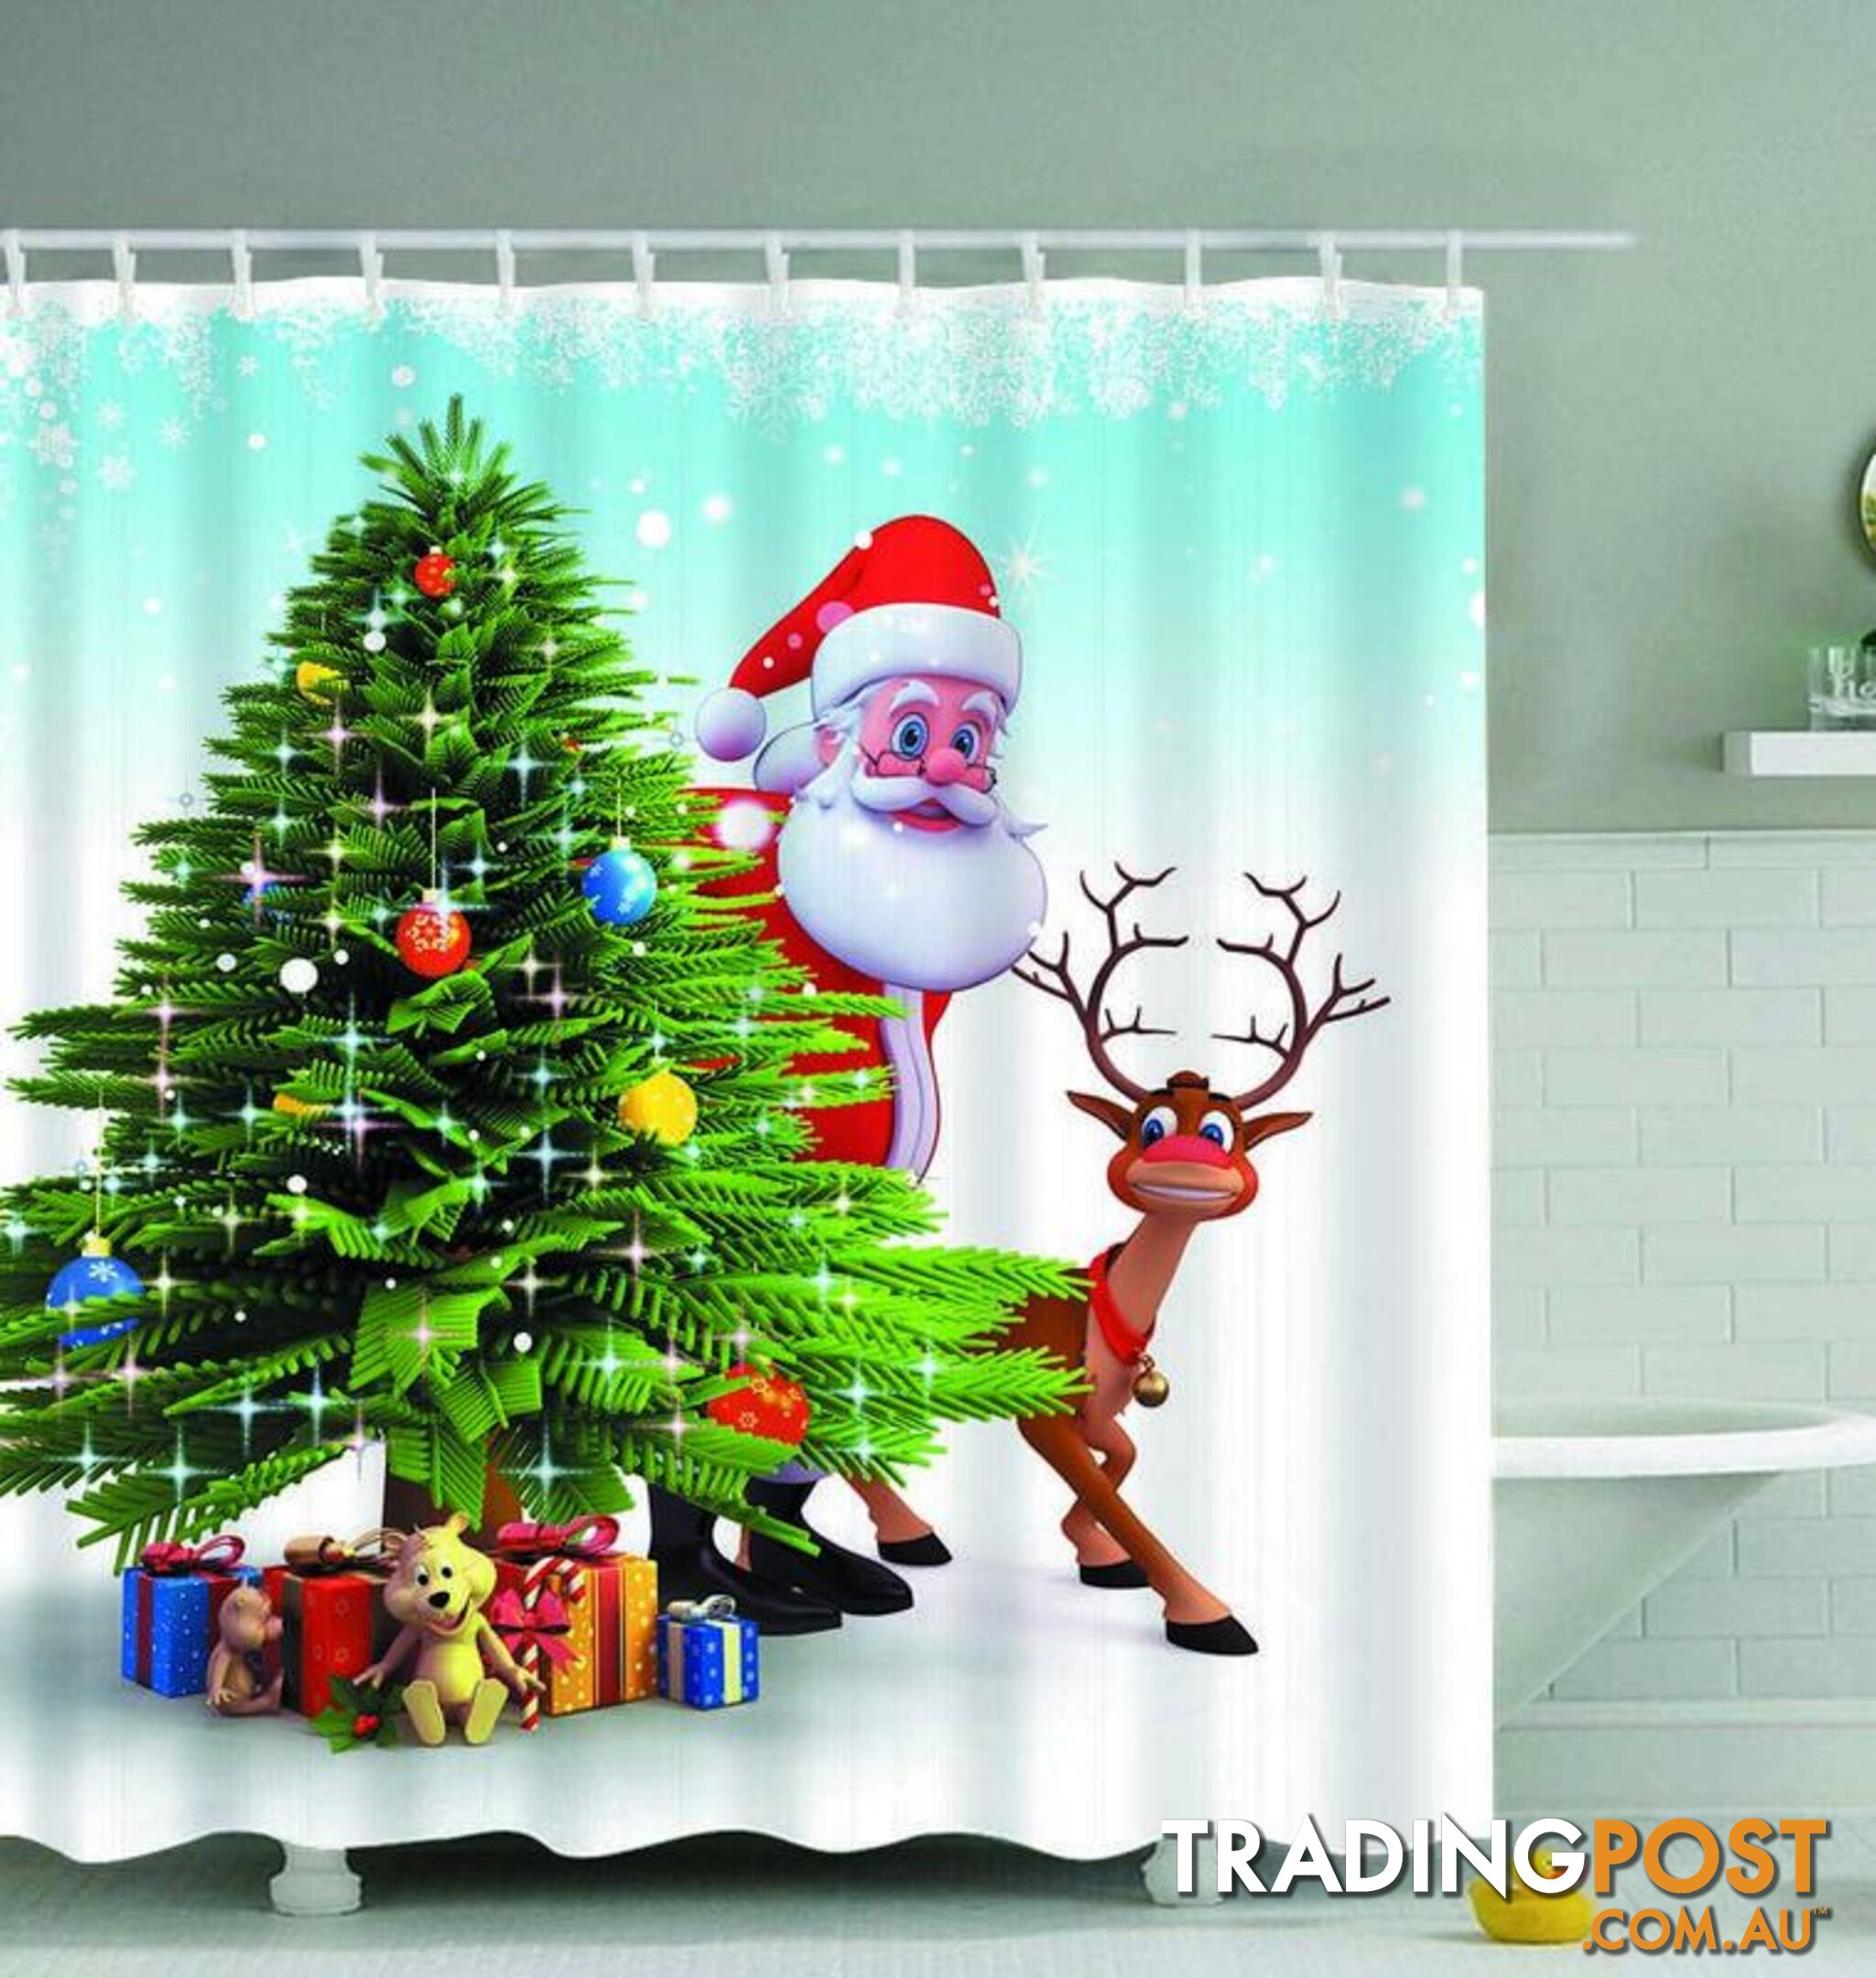 Santa And Reindeer Sneaking Out Shower Curtain - Curtains - 7427046063142